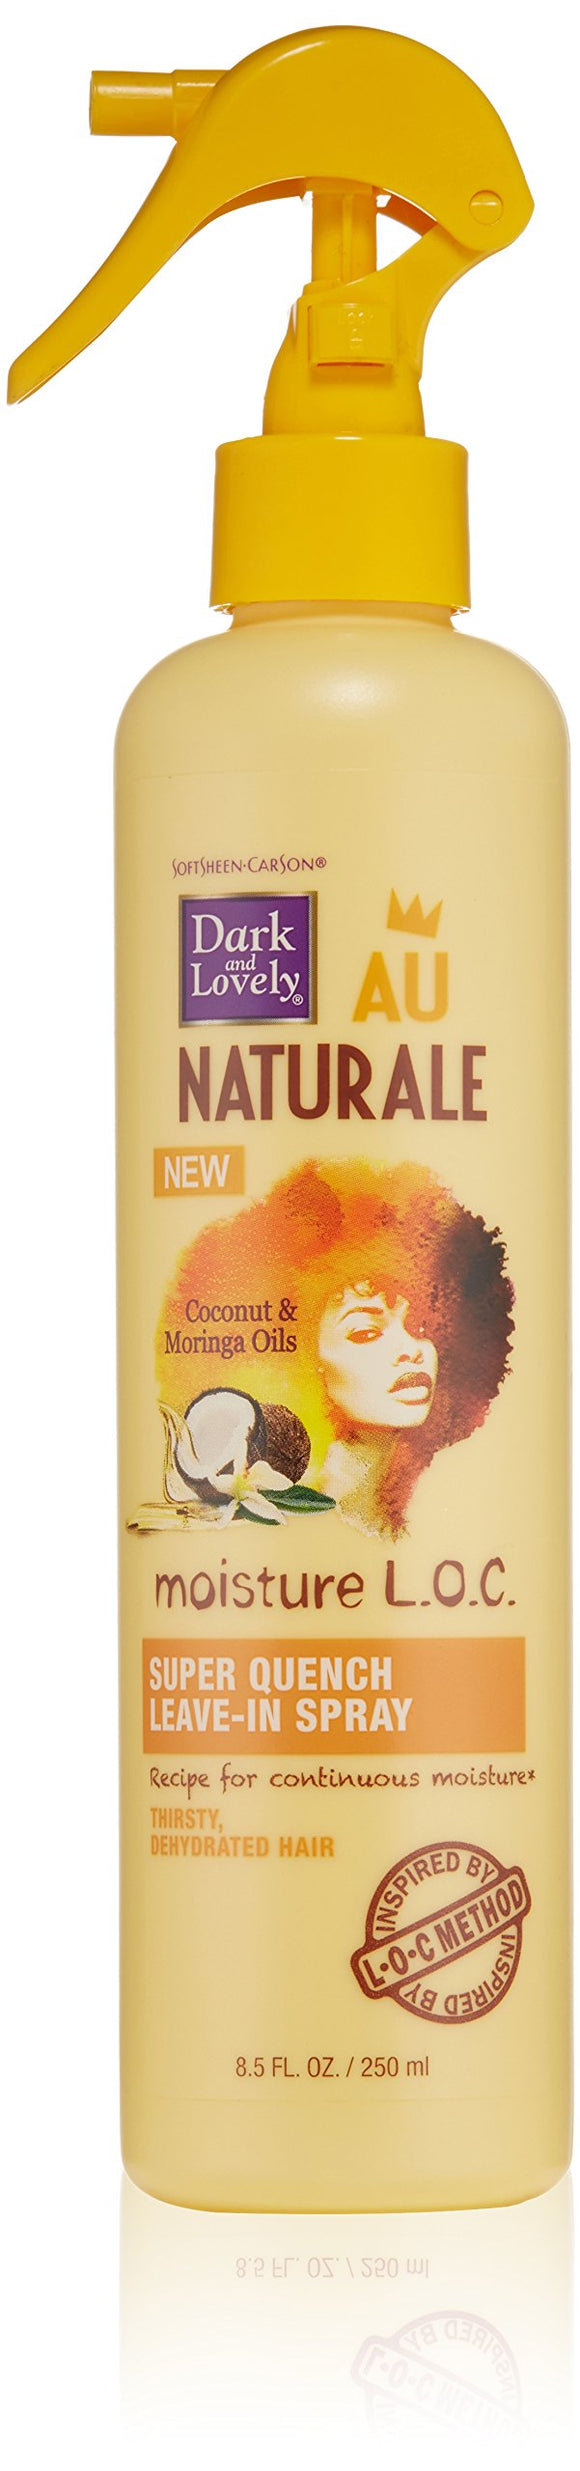 SoftSheen-Carson Dark and Lovely Au Naturale Moisture L.O.C. Super Quench Leave-In Spray, 8.5 fl oz - Beauty Fleet